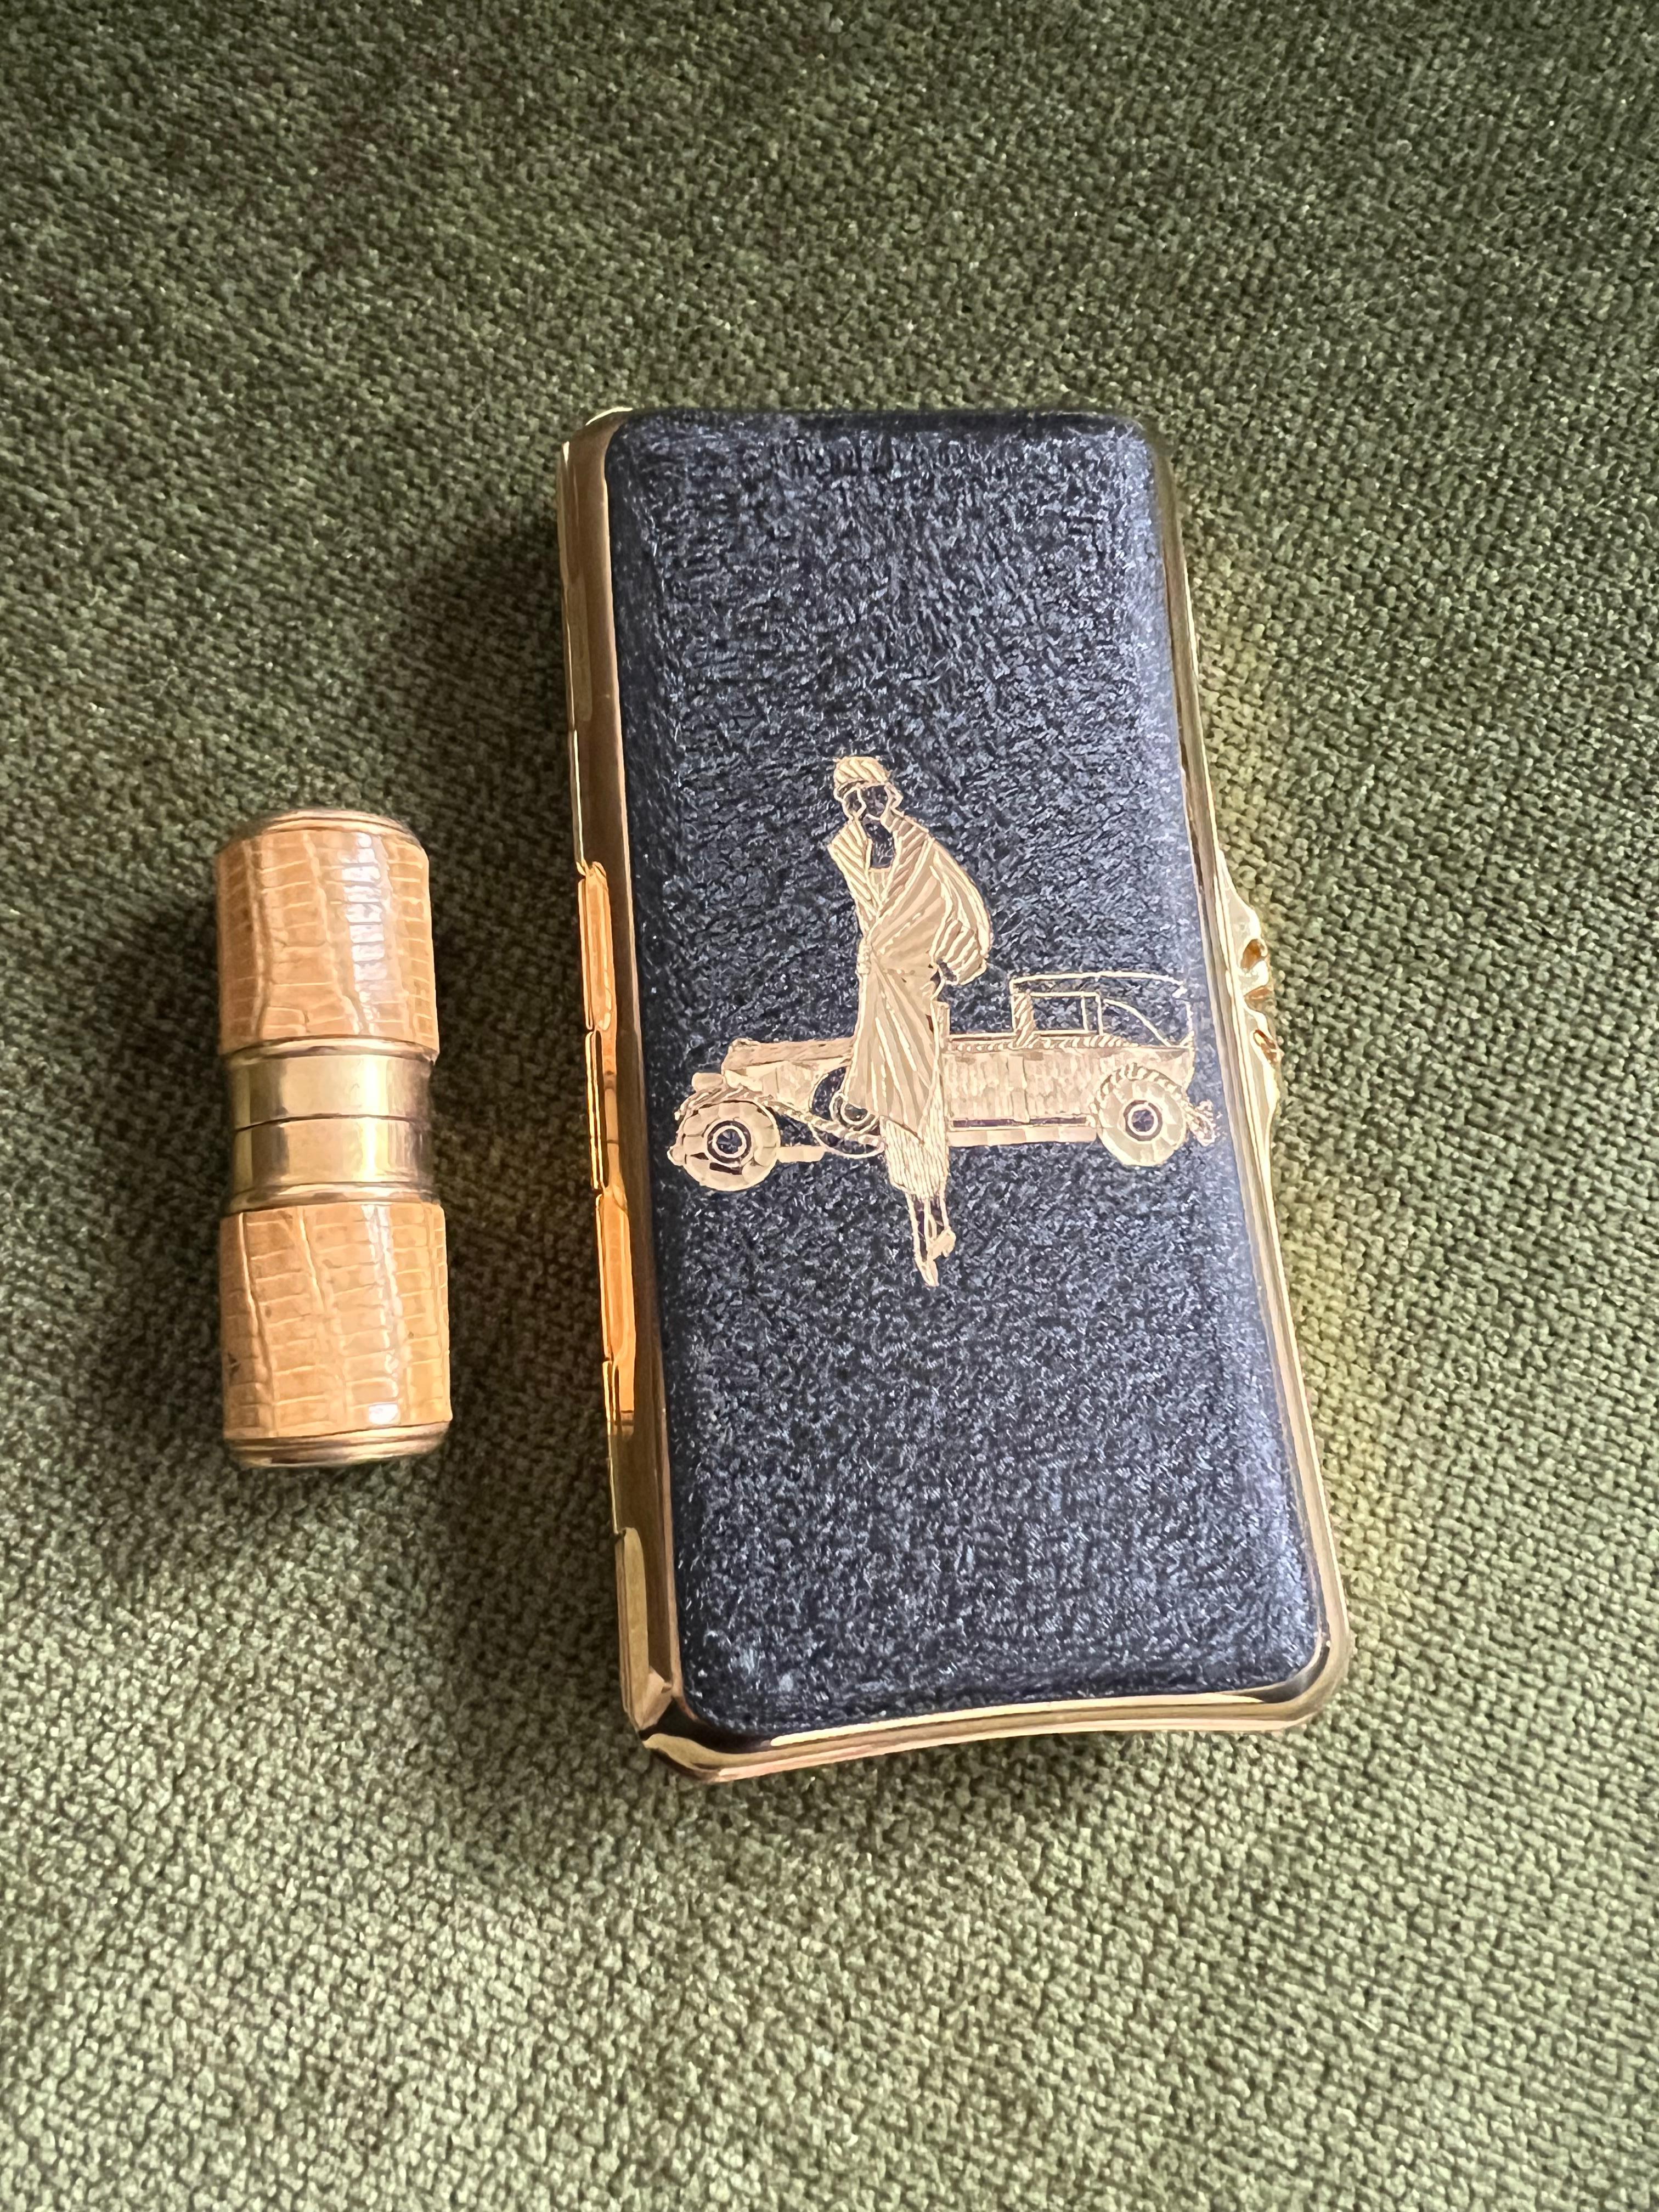 Rare Vintage Stratton Cigarette Case
Art Deco 60s
Made in England 
&
Rare Vintage Bric Lux Paris Lipstick Petrol lighter with Snake Skin 
Art Deco 50s 
Made in France 

Wonderful set to enjoy the pleasure of old times style.
Perfect for a special